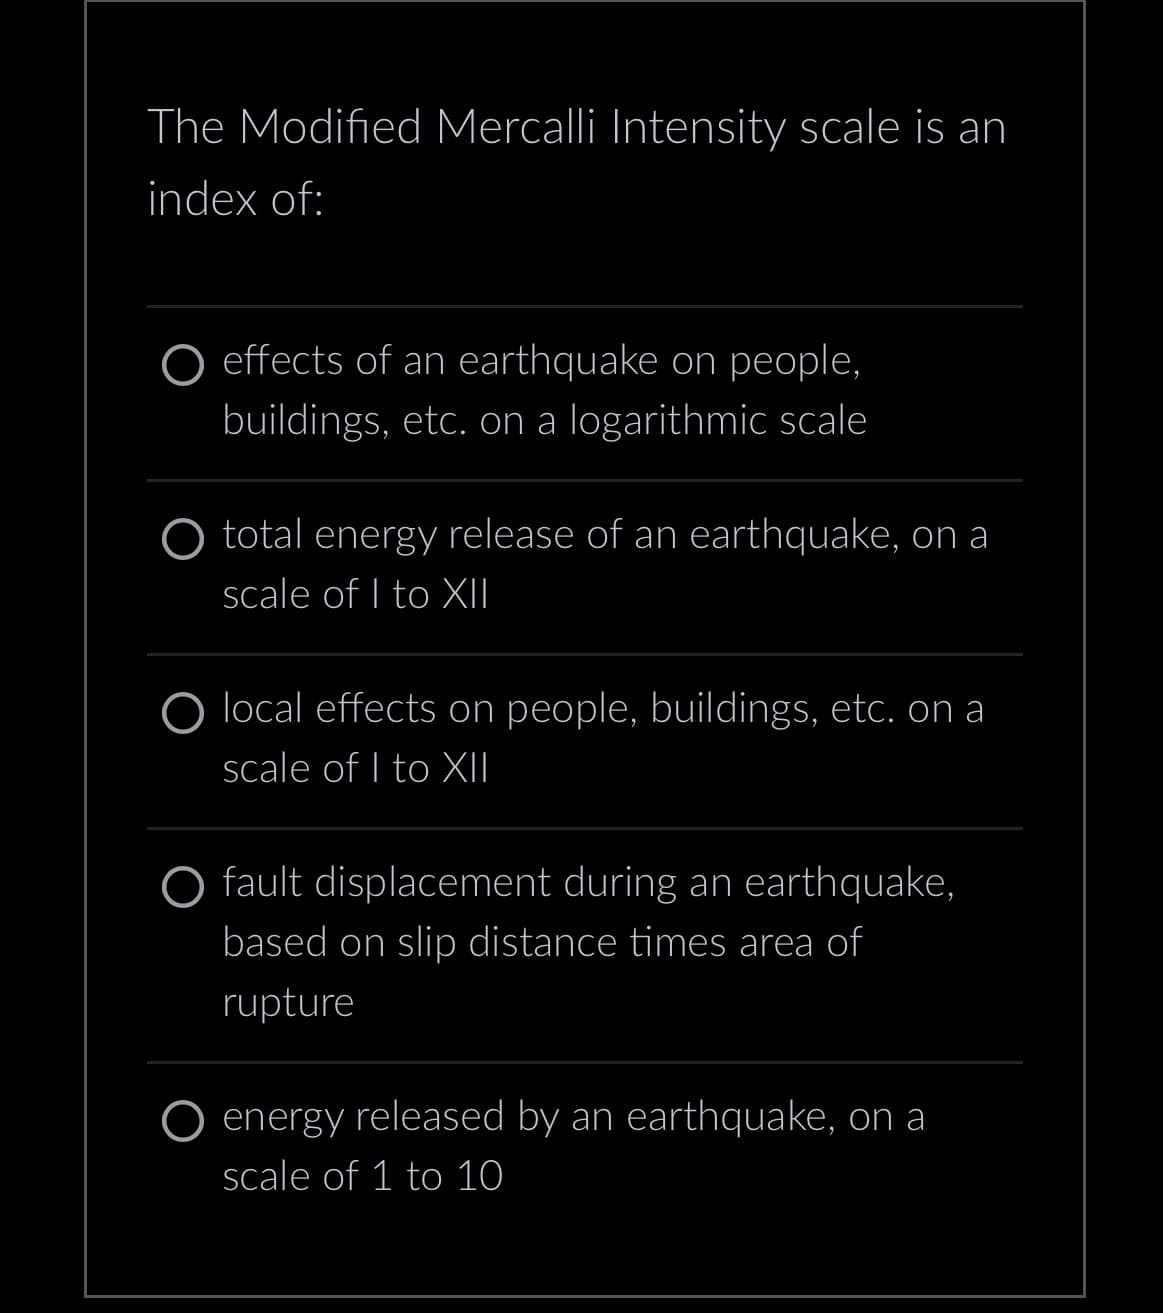 The Modified Mercalli Intensity scale is an
index of:
effects of an earthquake on people,
buildings, etc. on a logarithmic scale
O total energy release of an earthquake, on a
scale of I to XII
local effects on people, buildings, etc. on a
scale of I to XII
O fault displacement during an earthquake,
based on slip distance times area of
rupture
energy released by an earthquake, on a
scale of 1 to 10